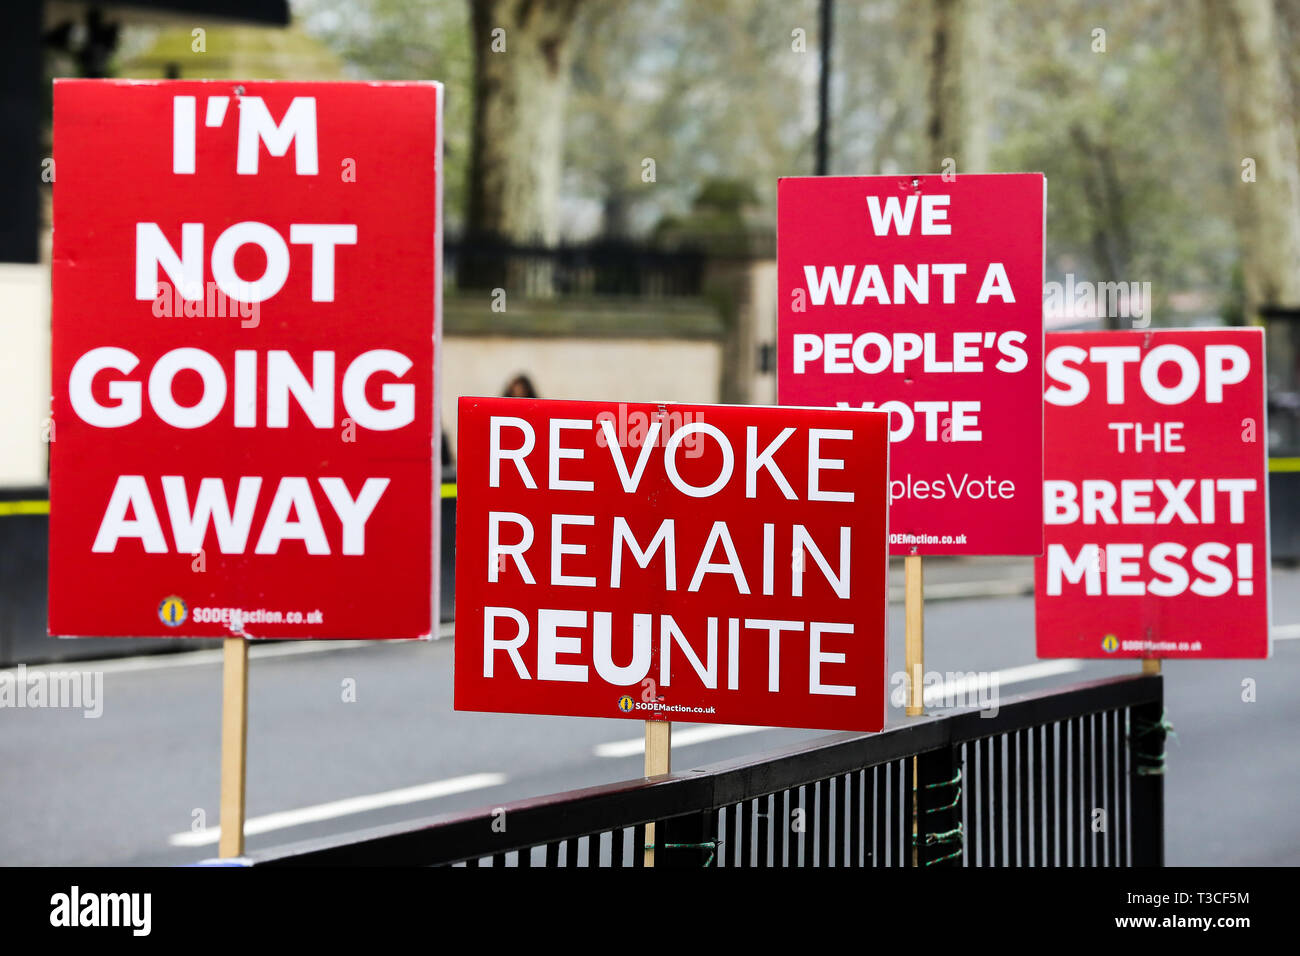 Brexit protest placards are seen outside the Houses of Parliament. British Prime Minister Theresa May will travel to Berlin and Paris on Tuesday, 9 April to meet with Chancellor of Germany - Angela Merkel and President of the French - Emmanuel Macron ahead of a crunch Brexit summit in Brussels on Wednesday, 10 April. Stock Photo